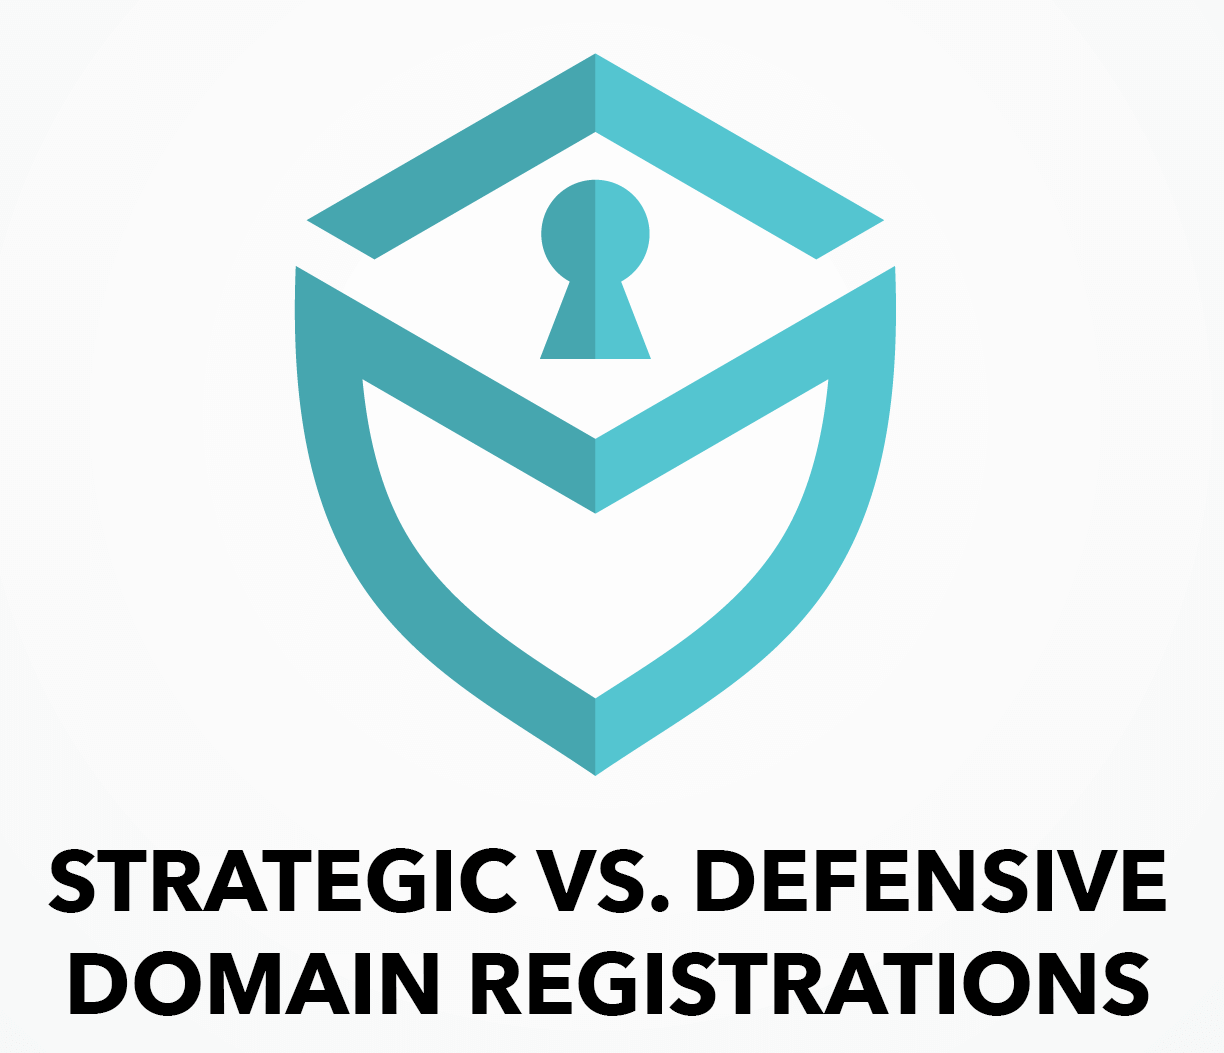 The difference between strategic and defensive domain registrations